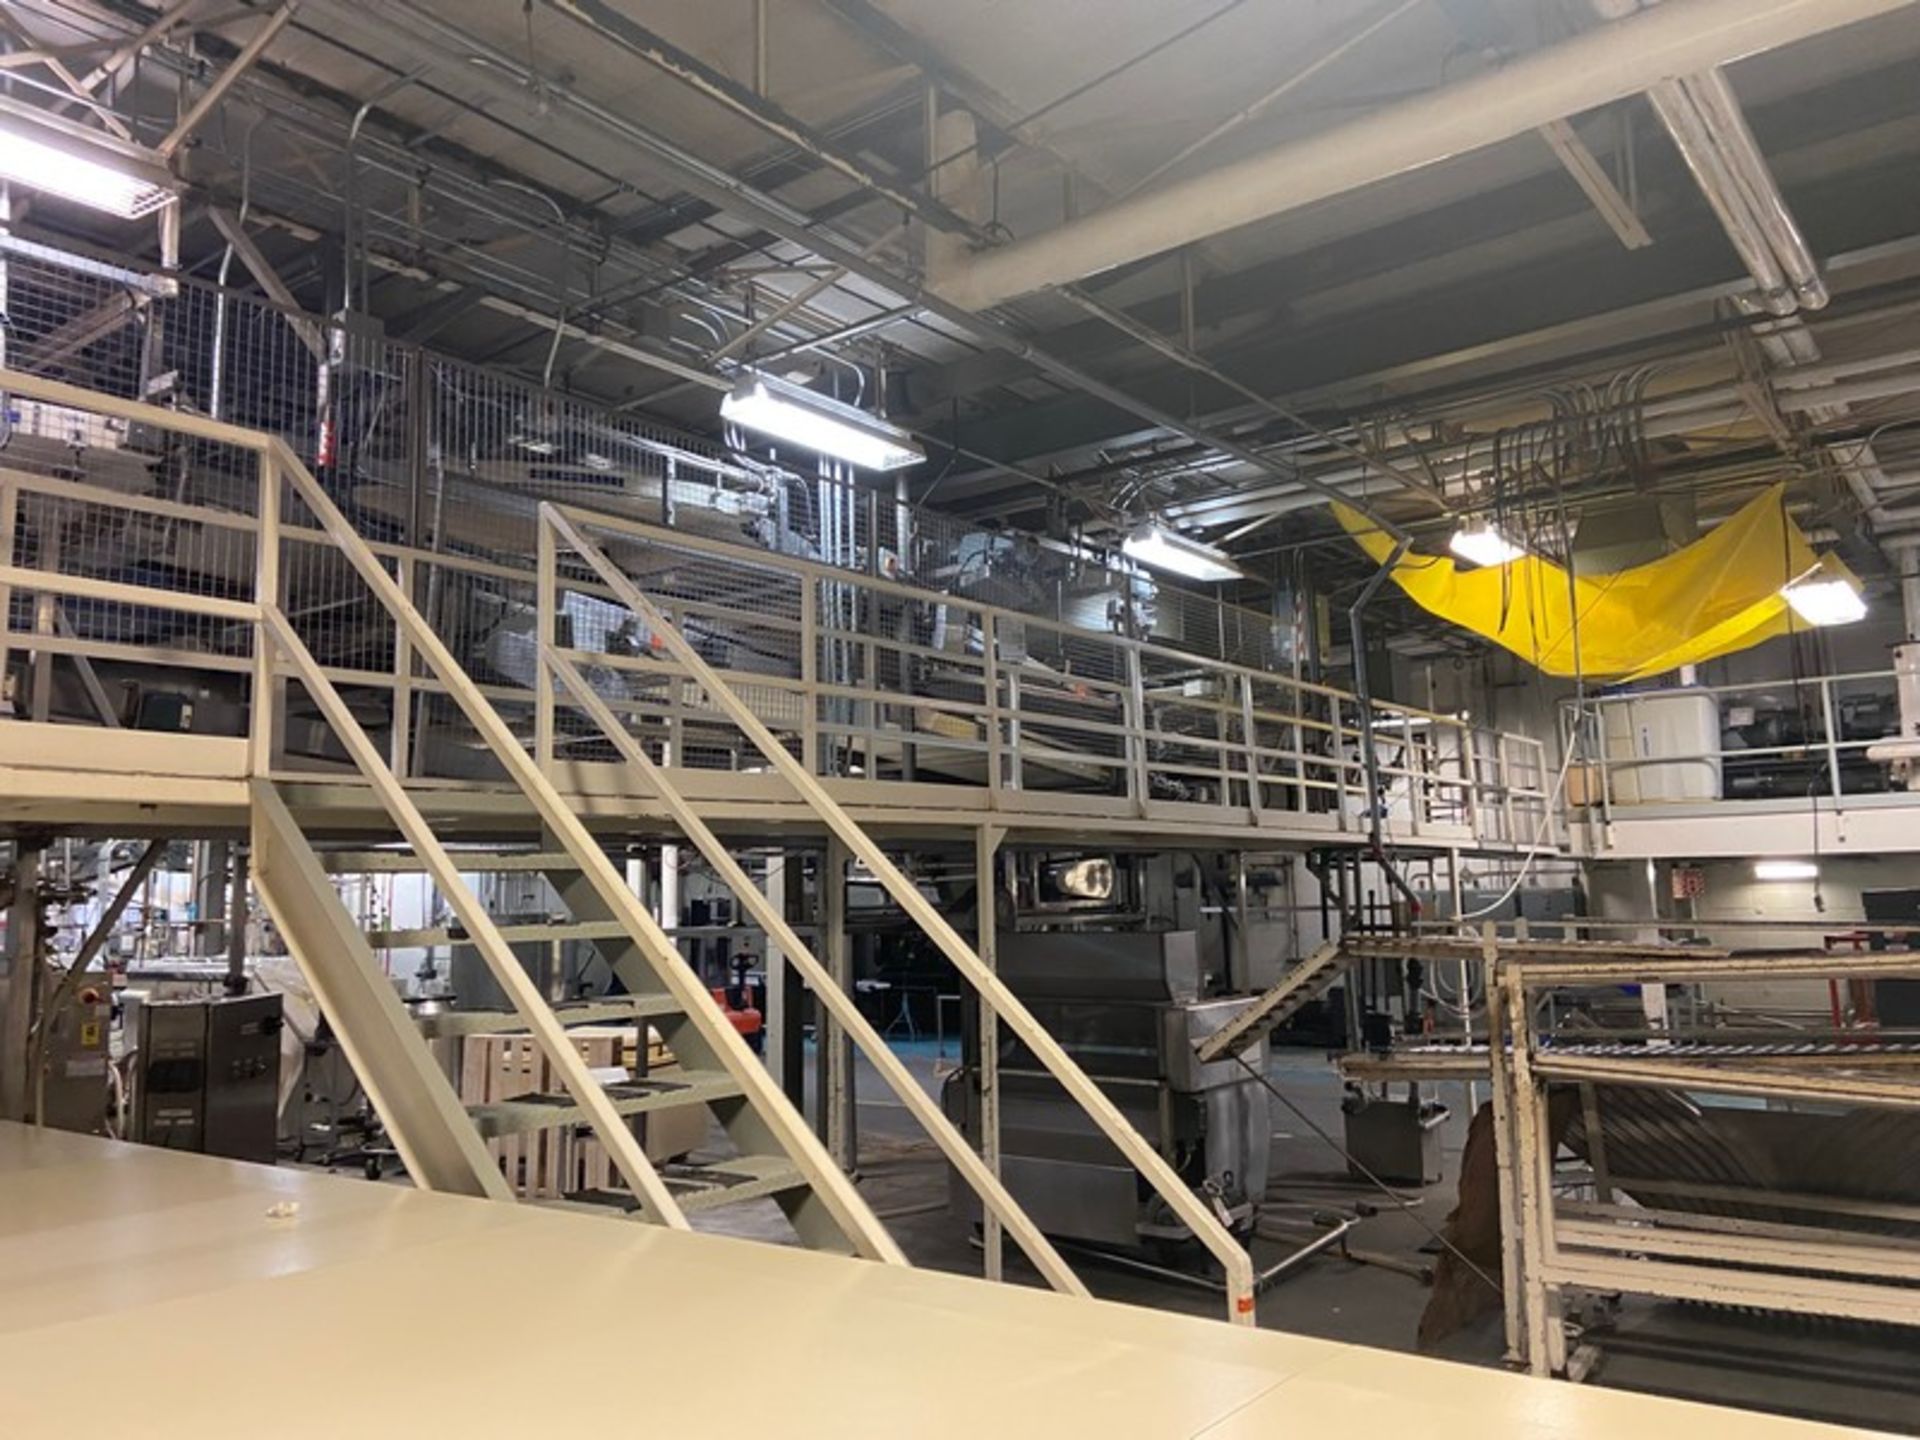 Steel Cat Walk Over Production Area, with Stairs Handrails (LOCATED IN SAINT-LAMBERT, QC) - Image 3 of 3